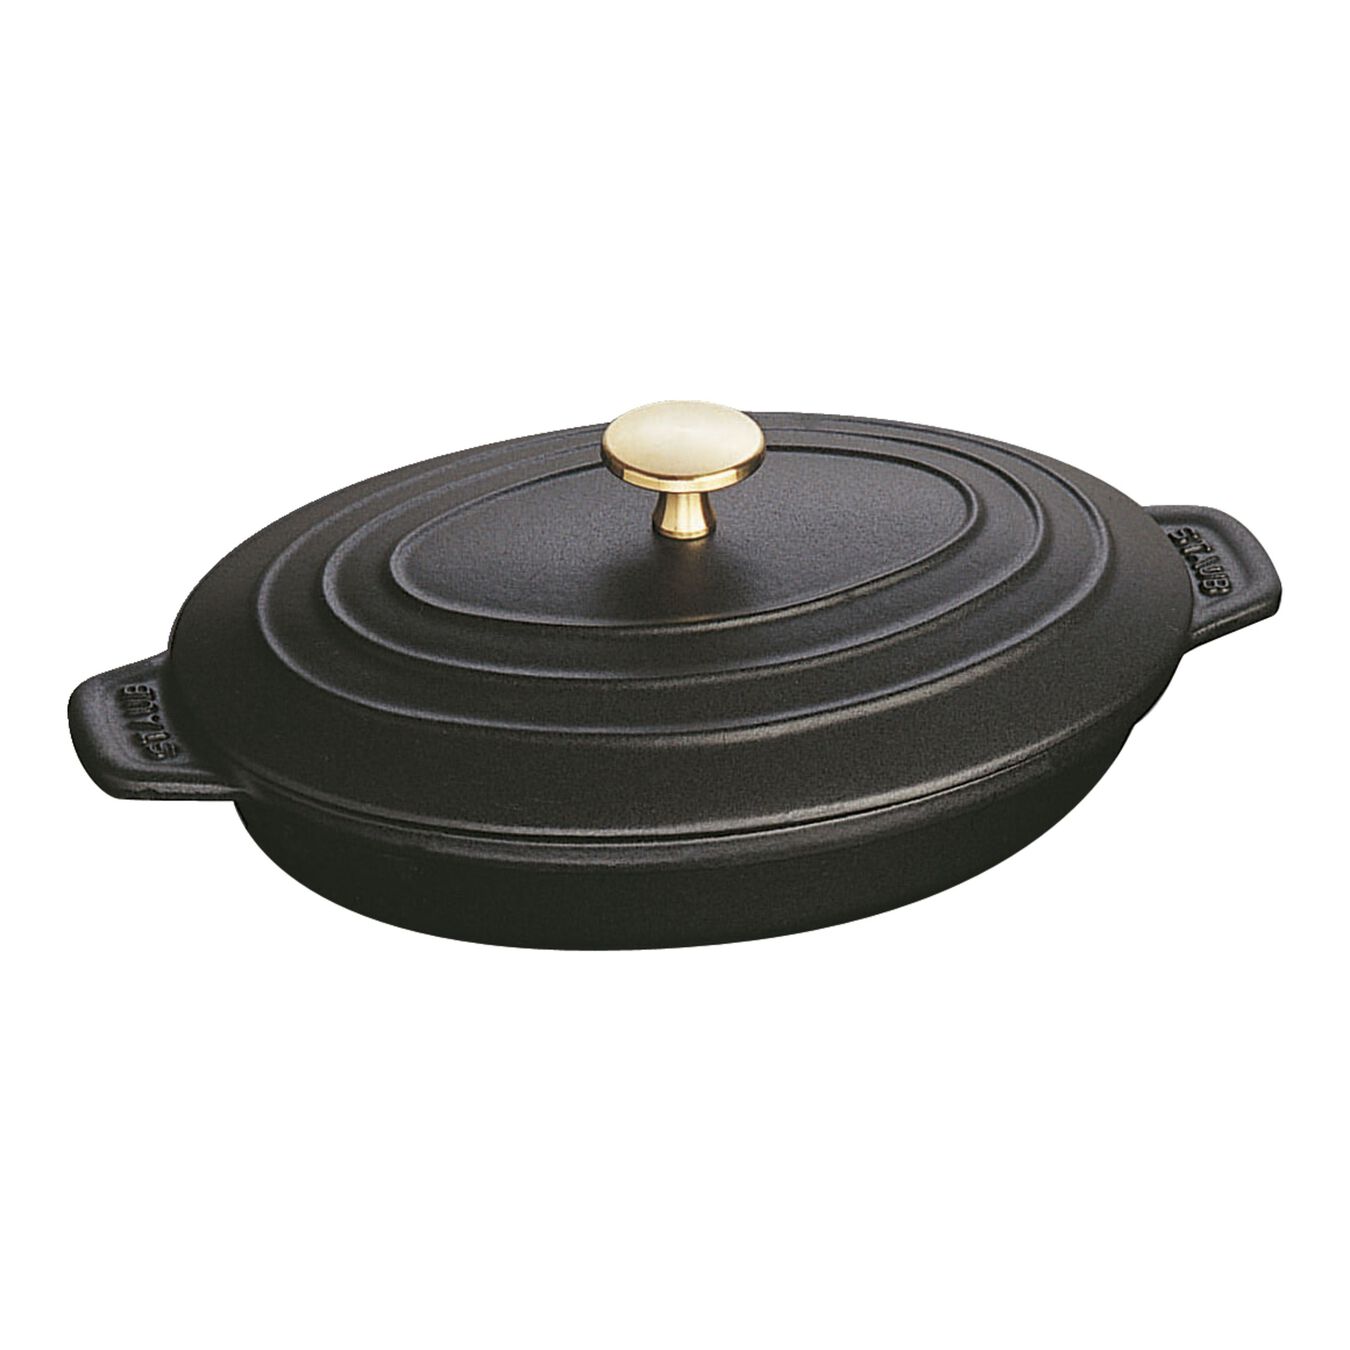 23 cm oval Cast iron Oven dish with lid black,,large 1